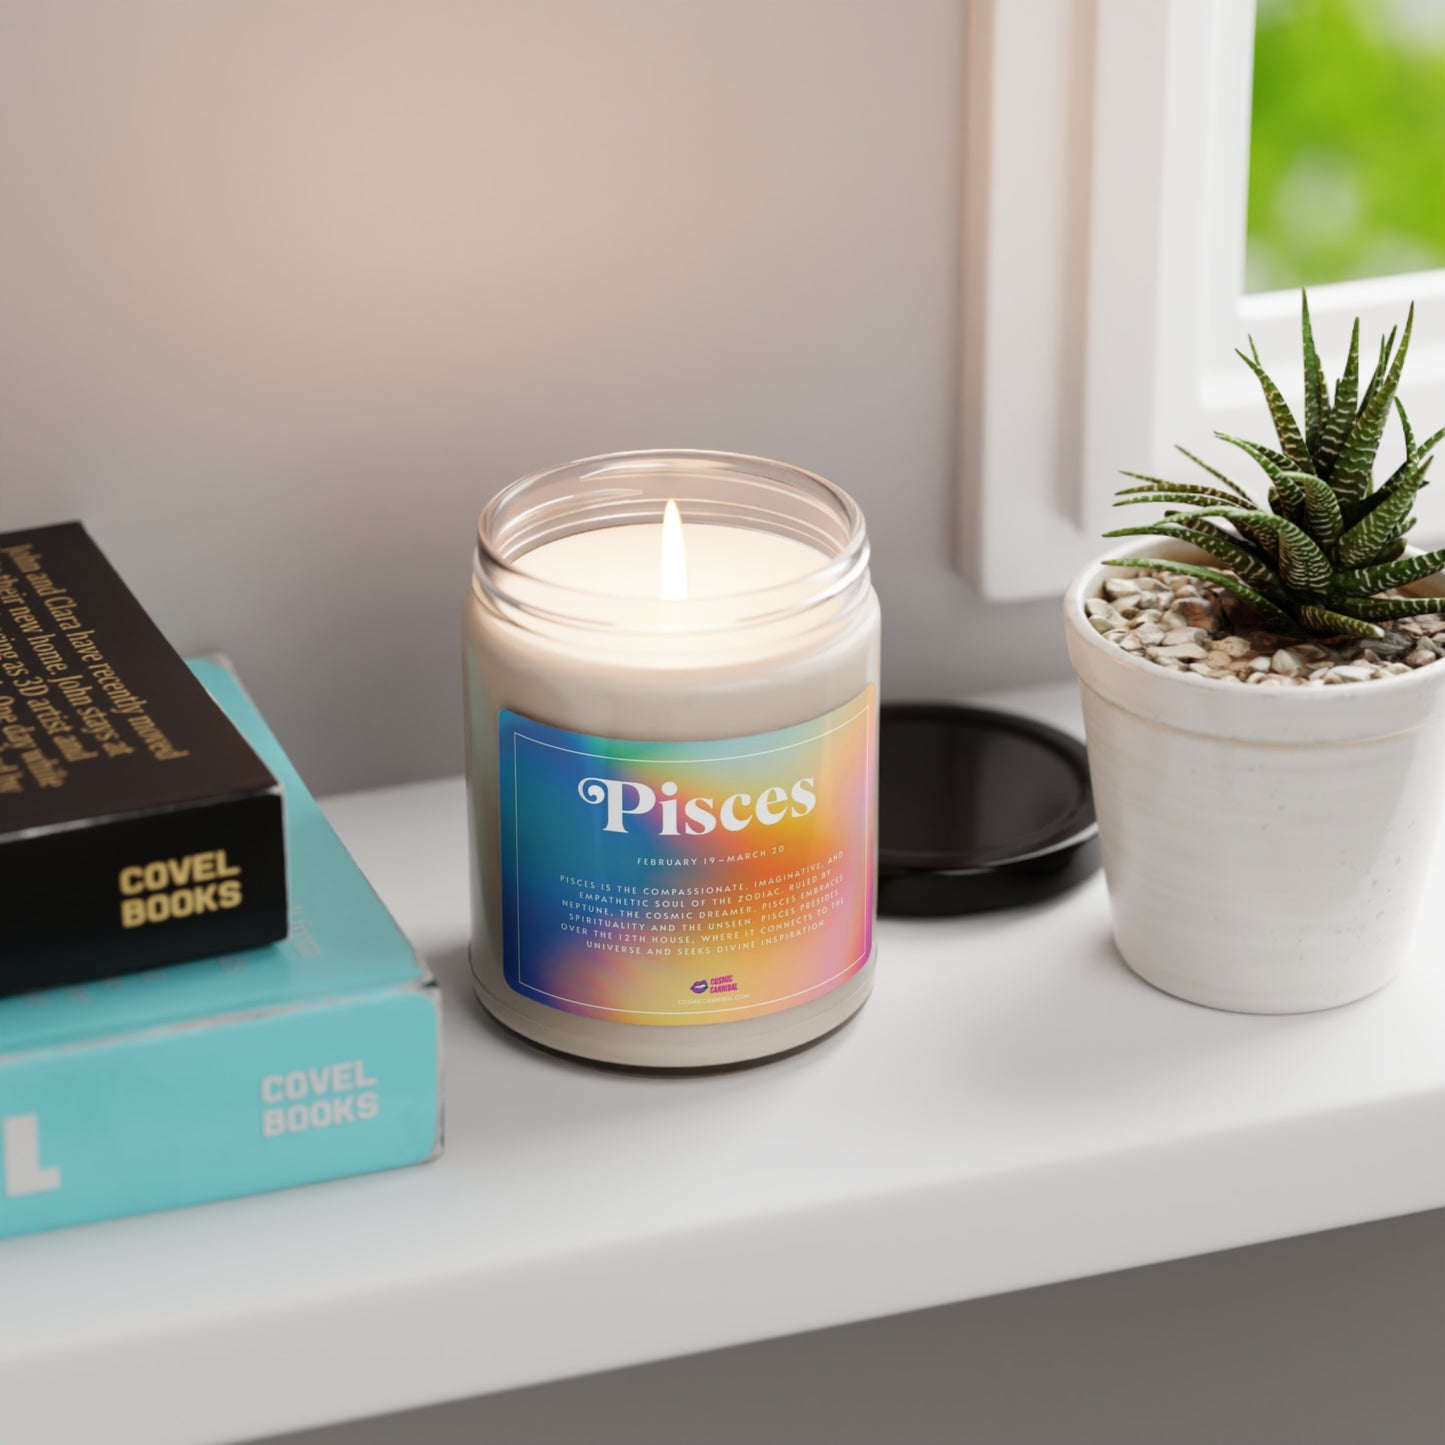 The Pisces Candle